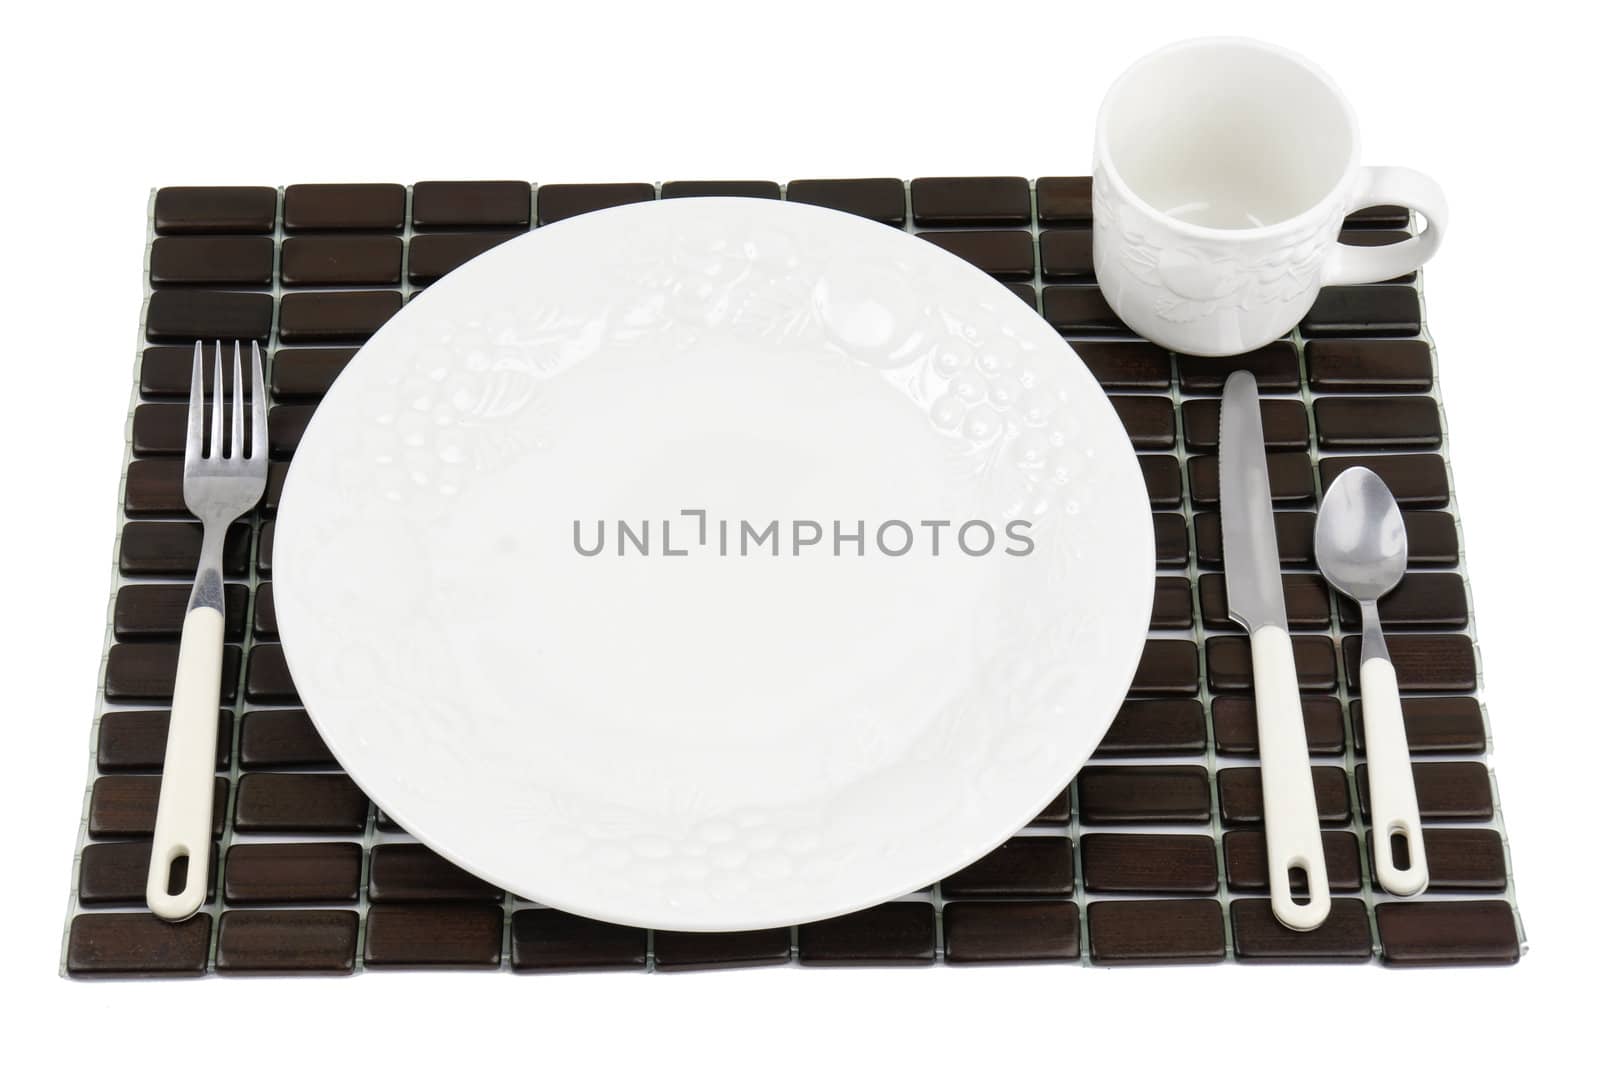 Dinner plate, white textured China with grapes and tomatoes design over a dark wood place mat.